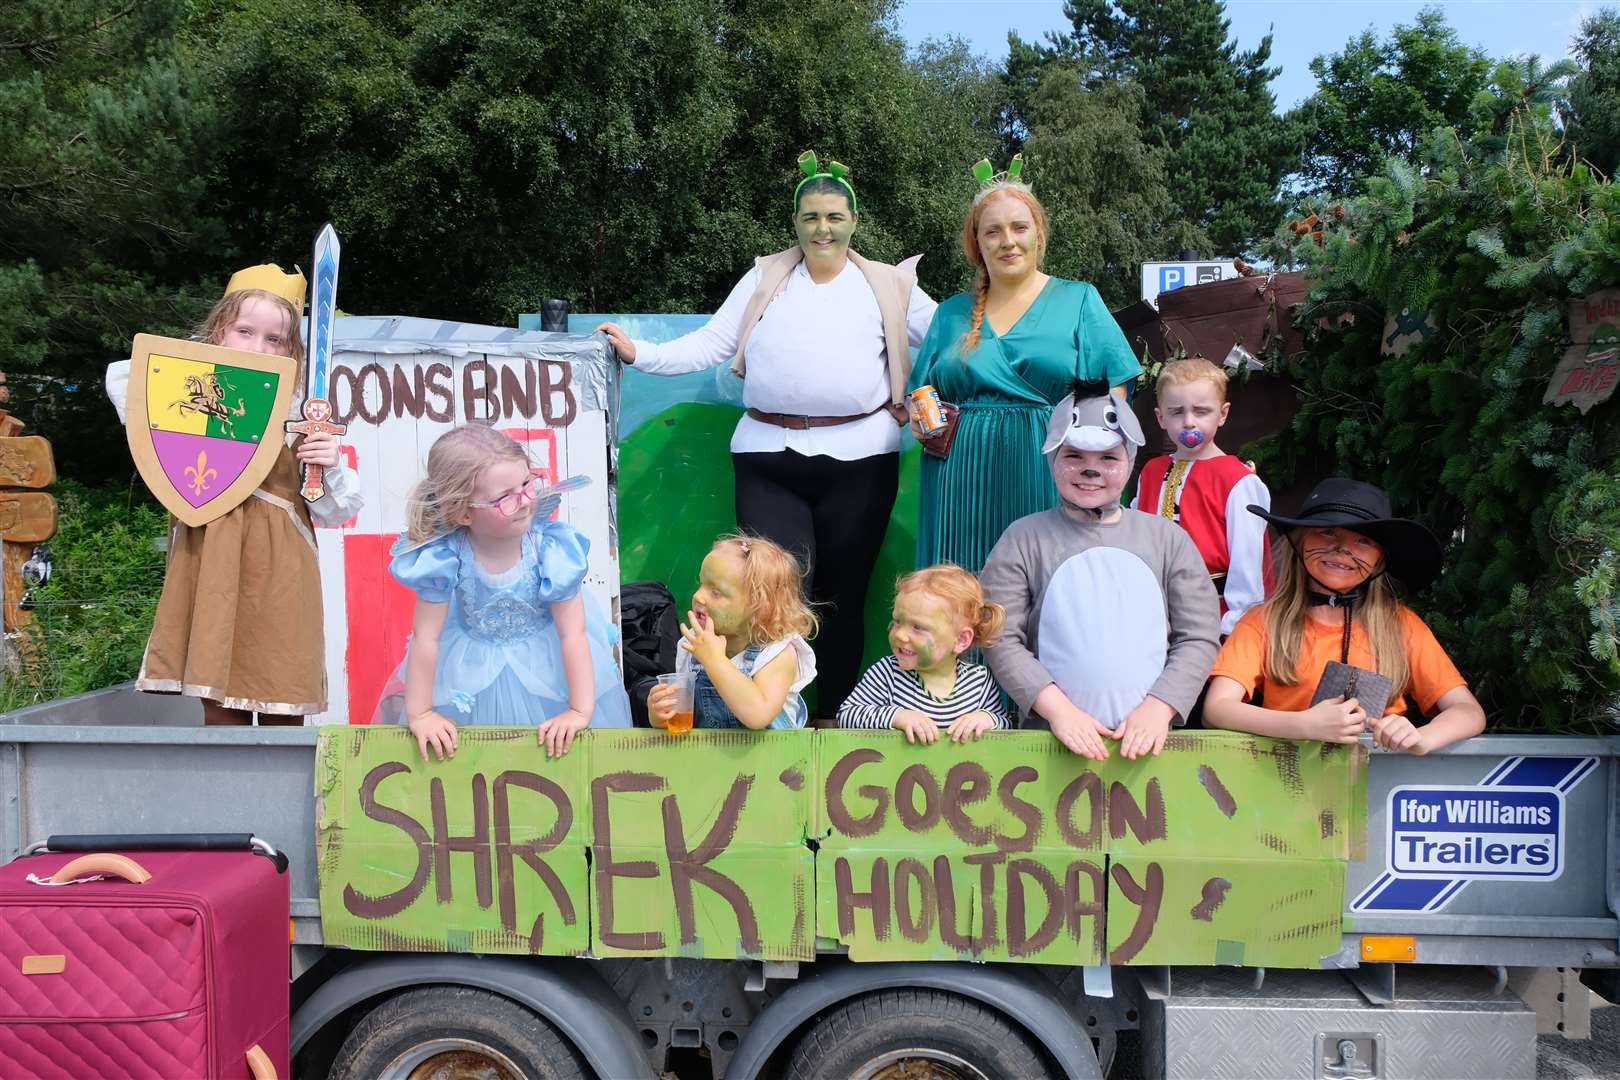 The Shrek Goes on Holiday float won the prize for funniest float.